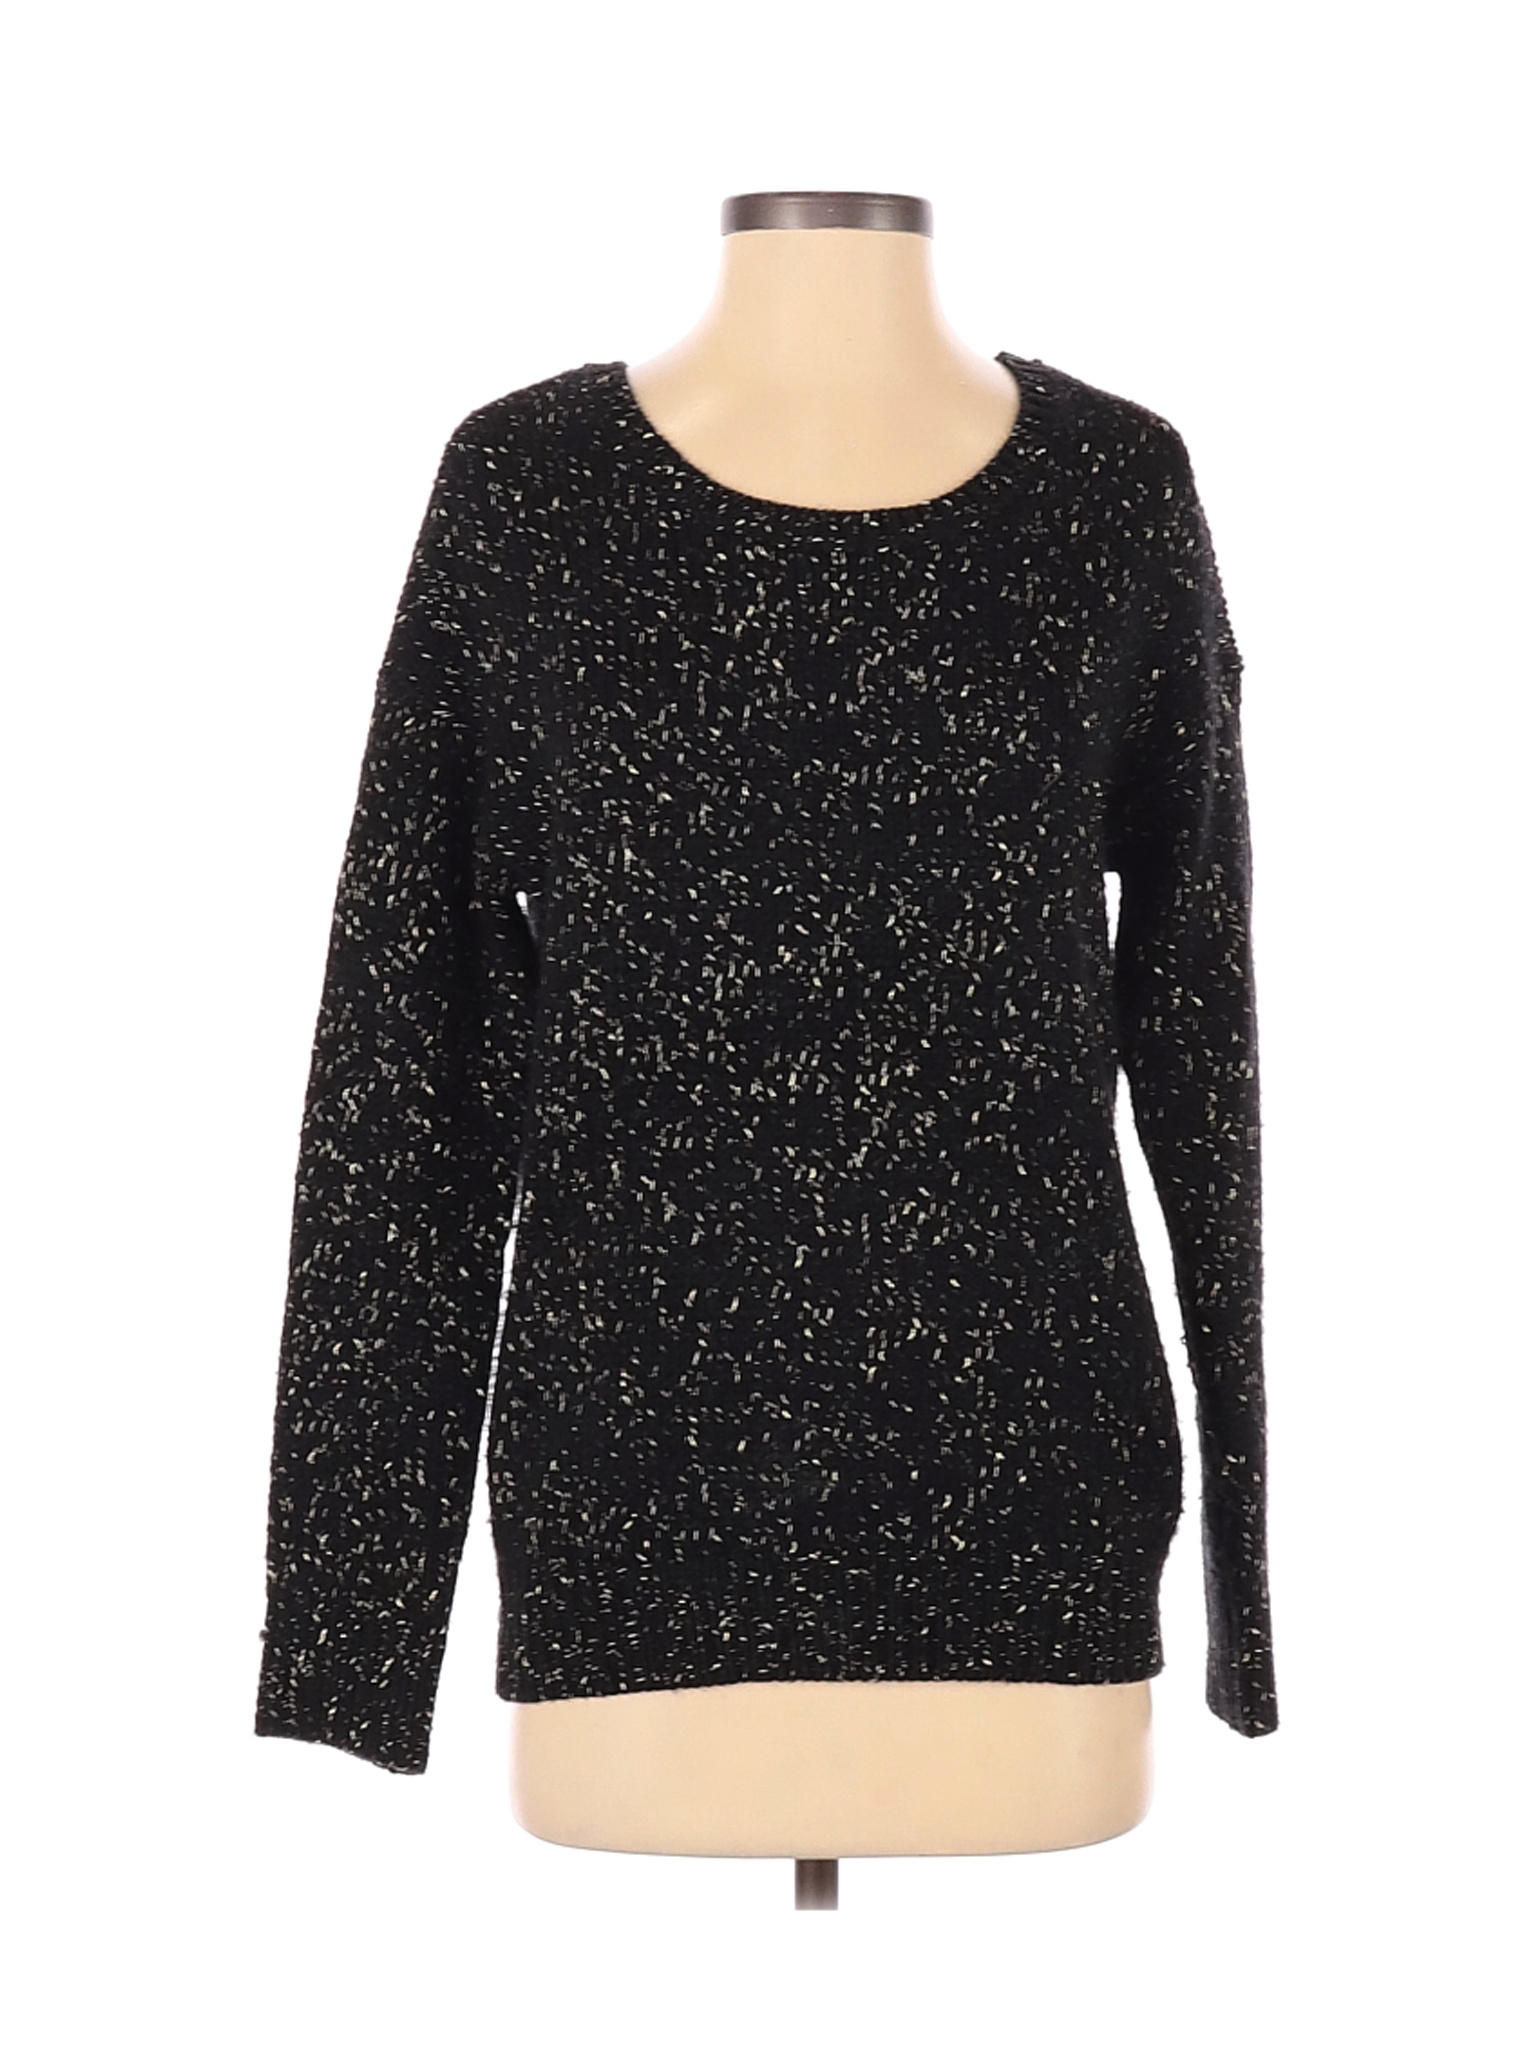 American Eagle Outfitters Women Black Pullover Sweater S | eBay